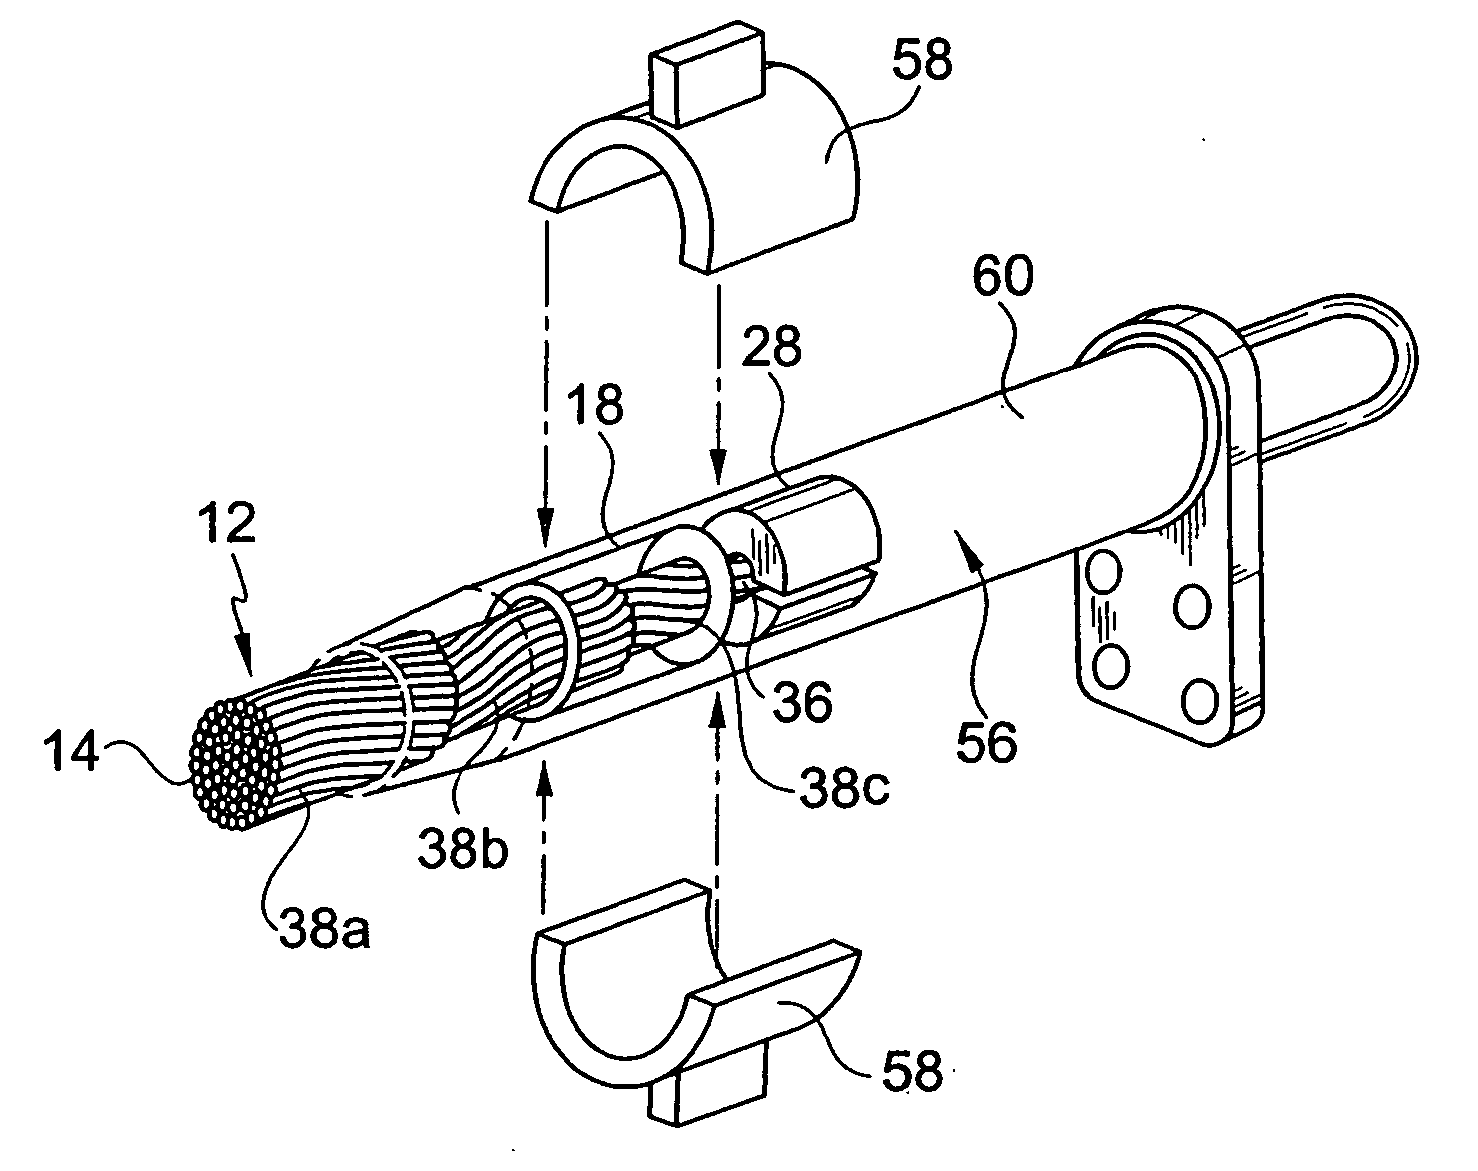 Compression connector assembly